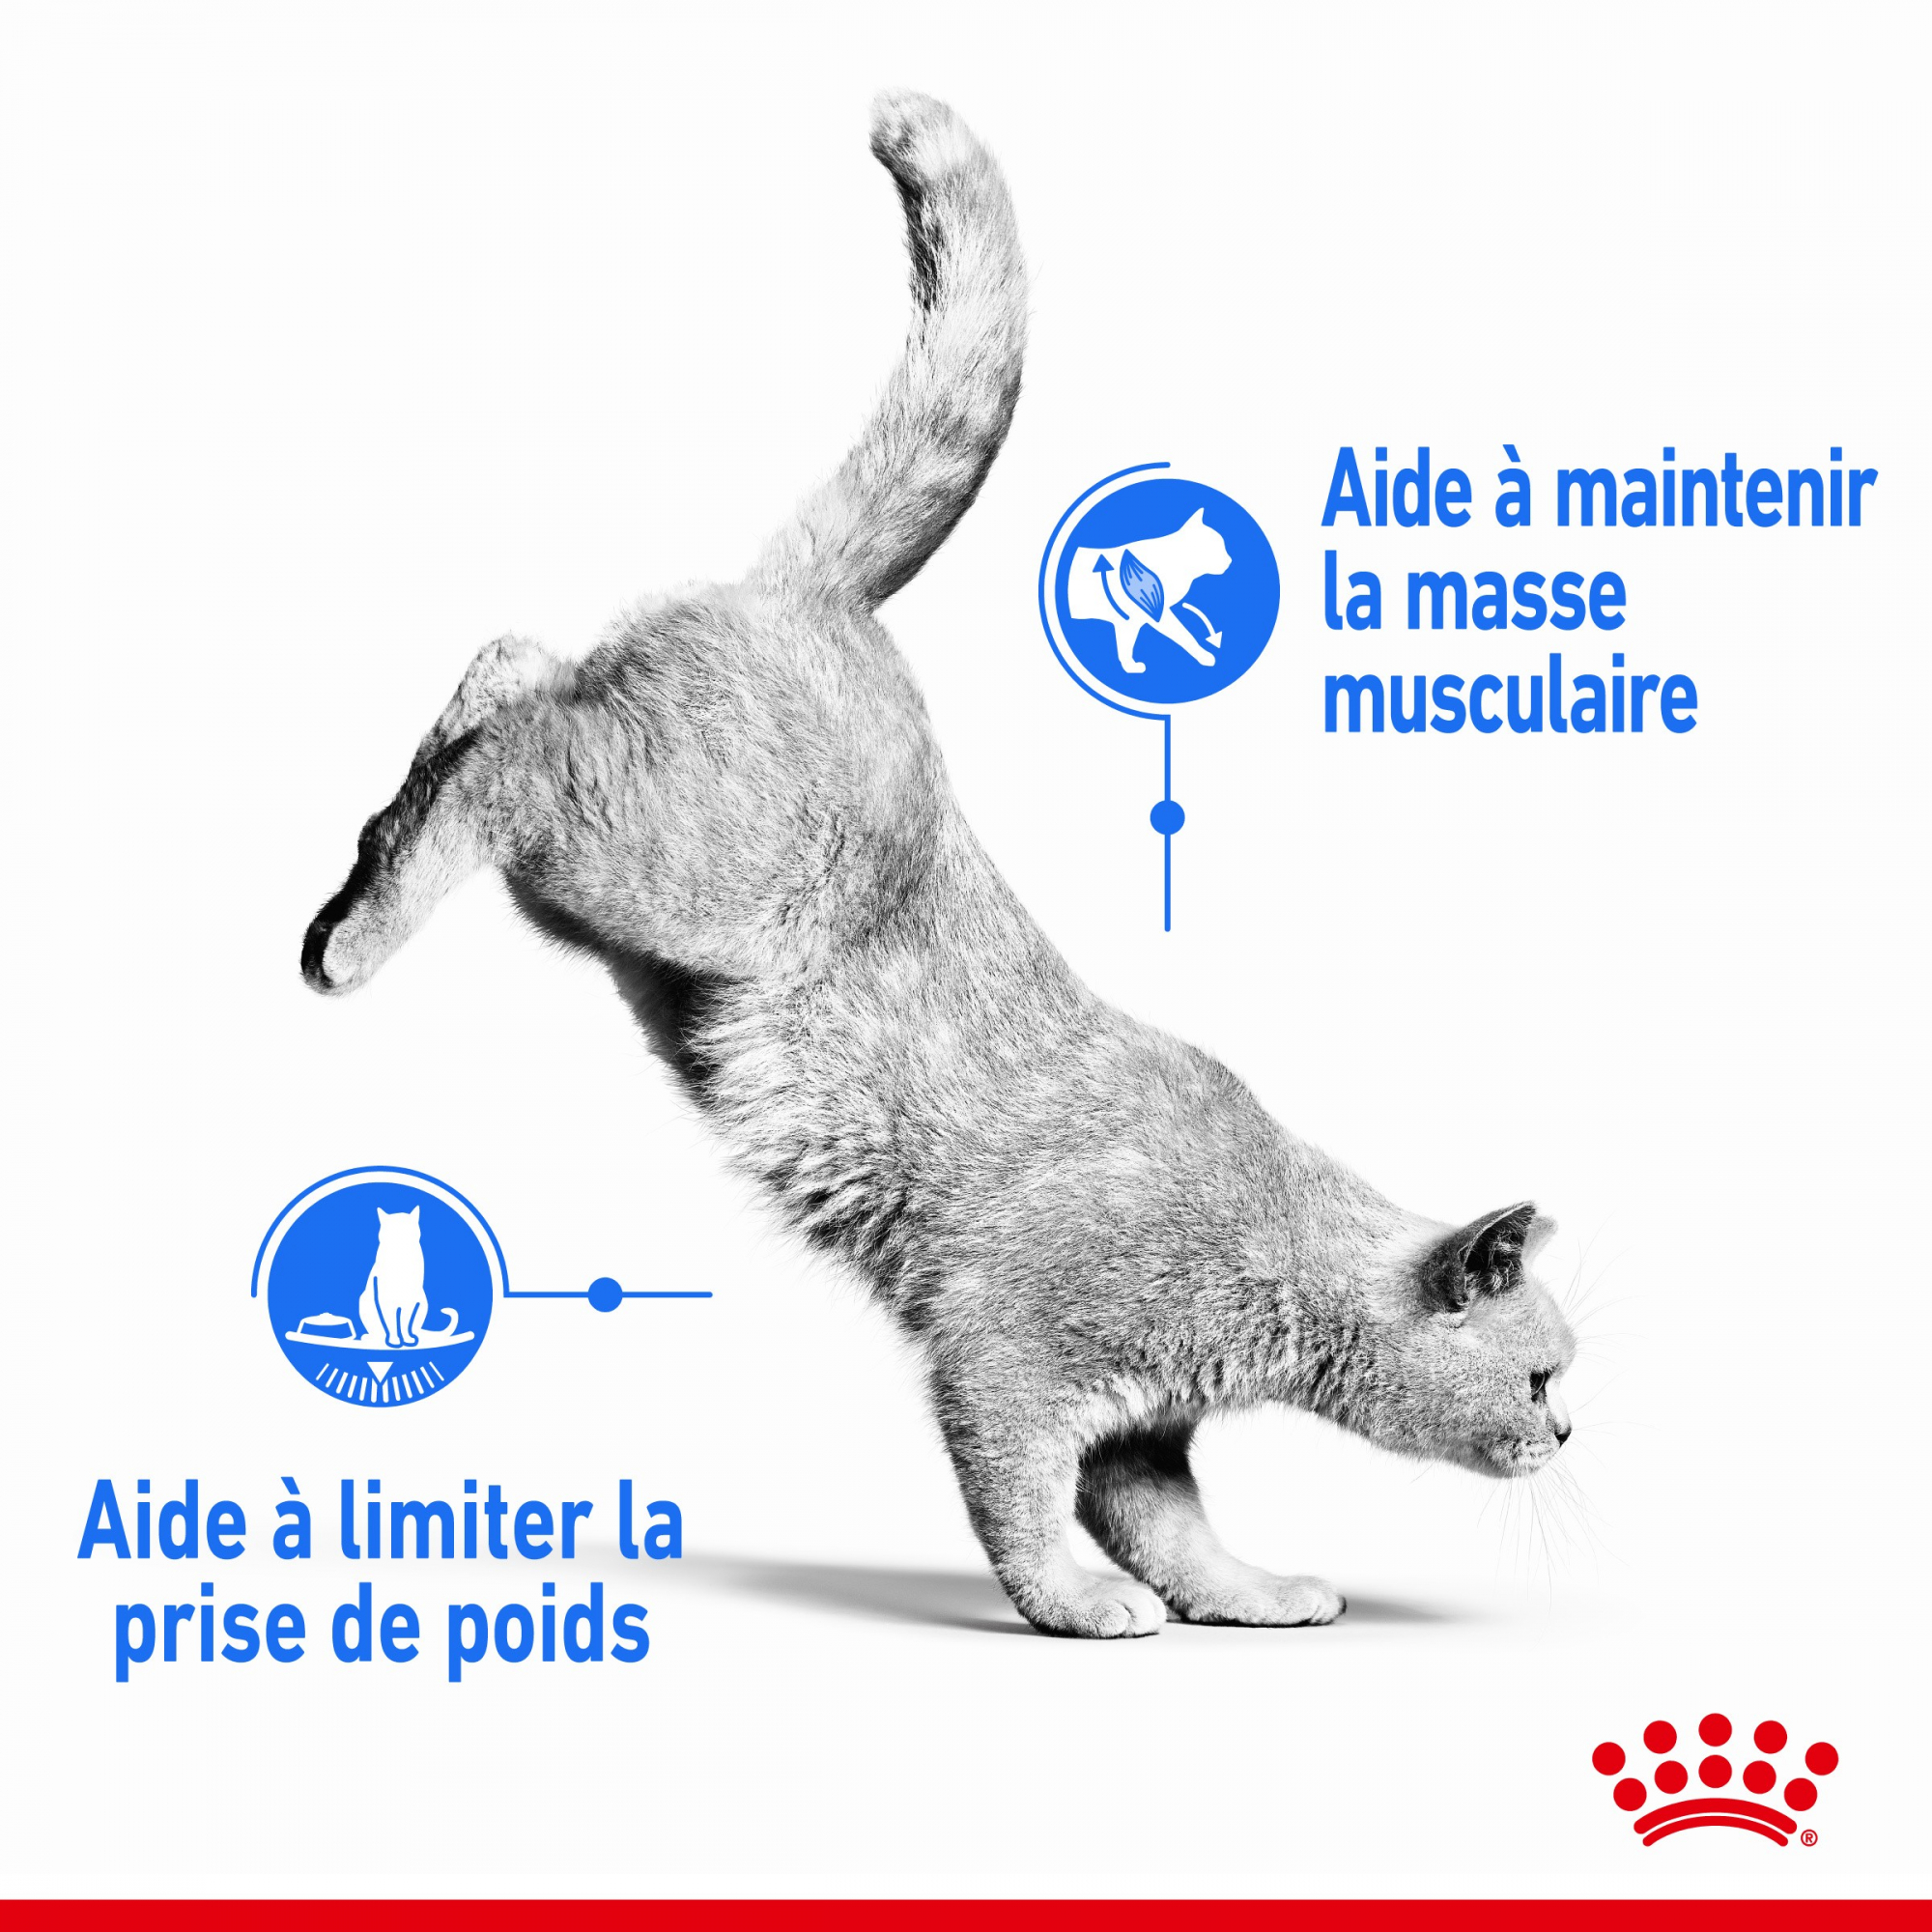 ROYAL CANIN Light Weight Care in mousse per gatti